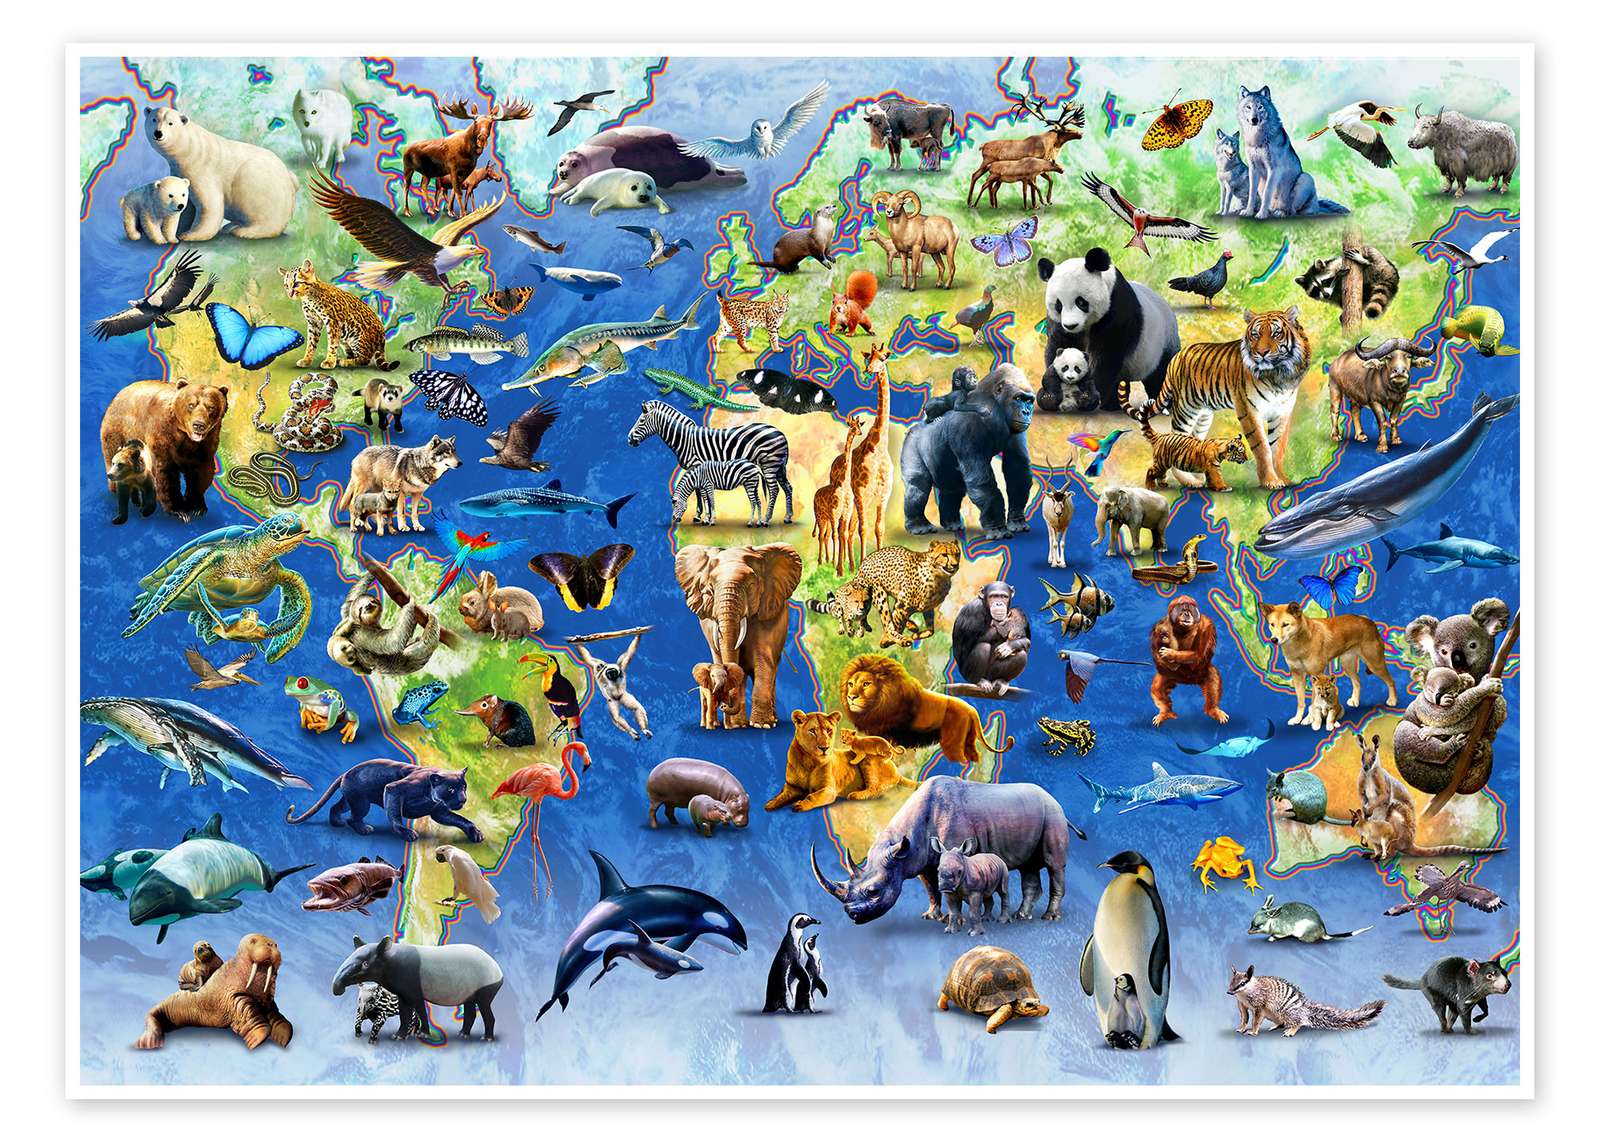 Endangered Animals puzzle online from photo